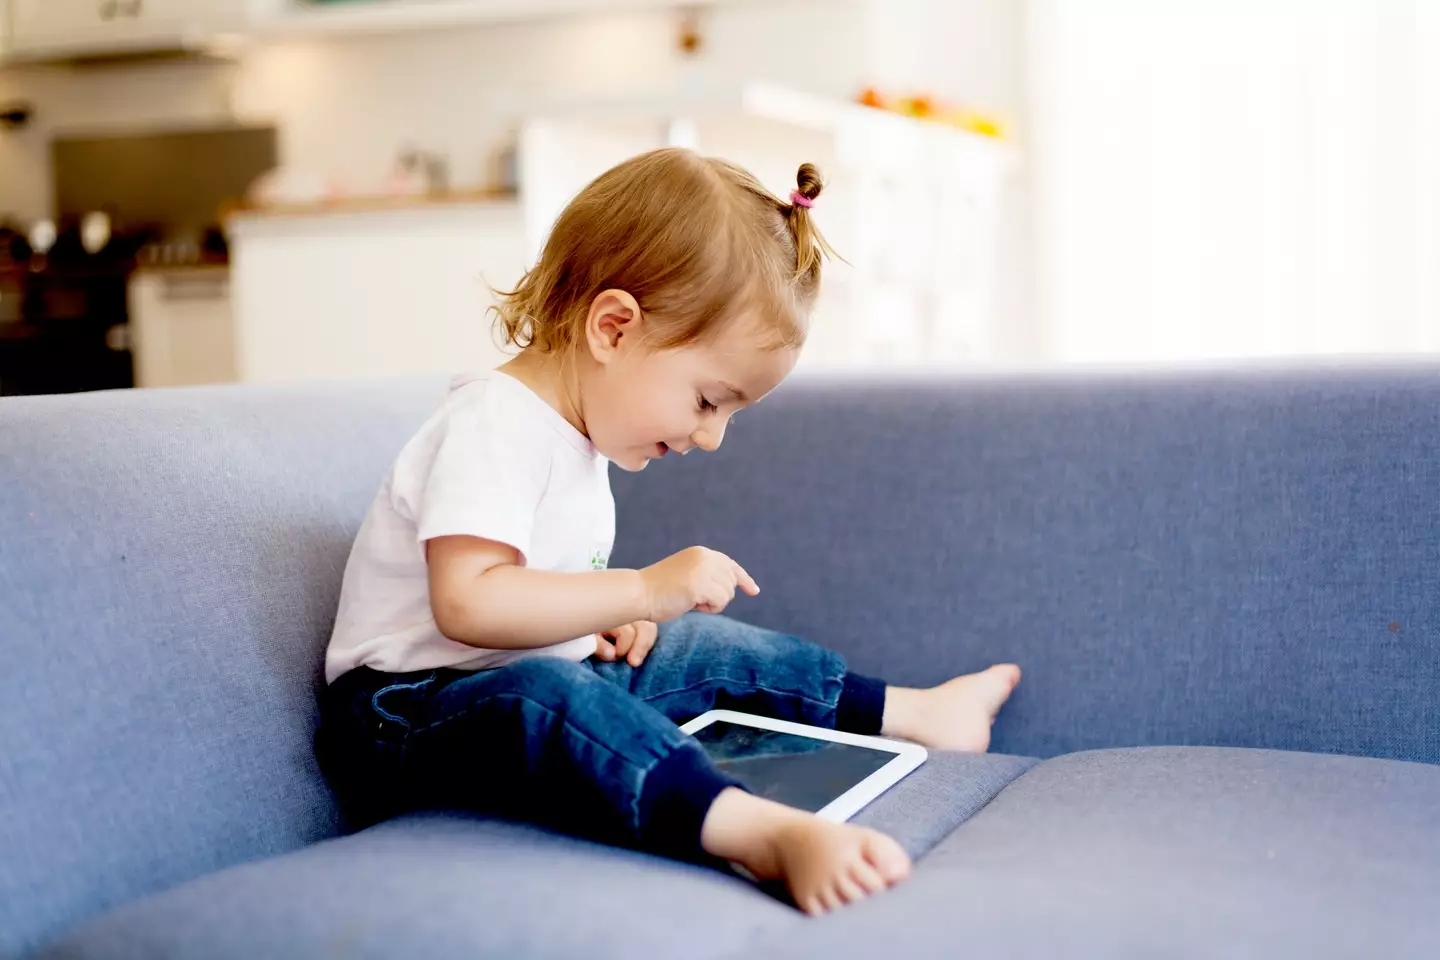 It's easy to use screen to keep kids entertained.